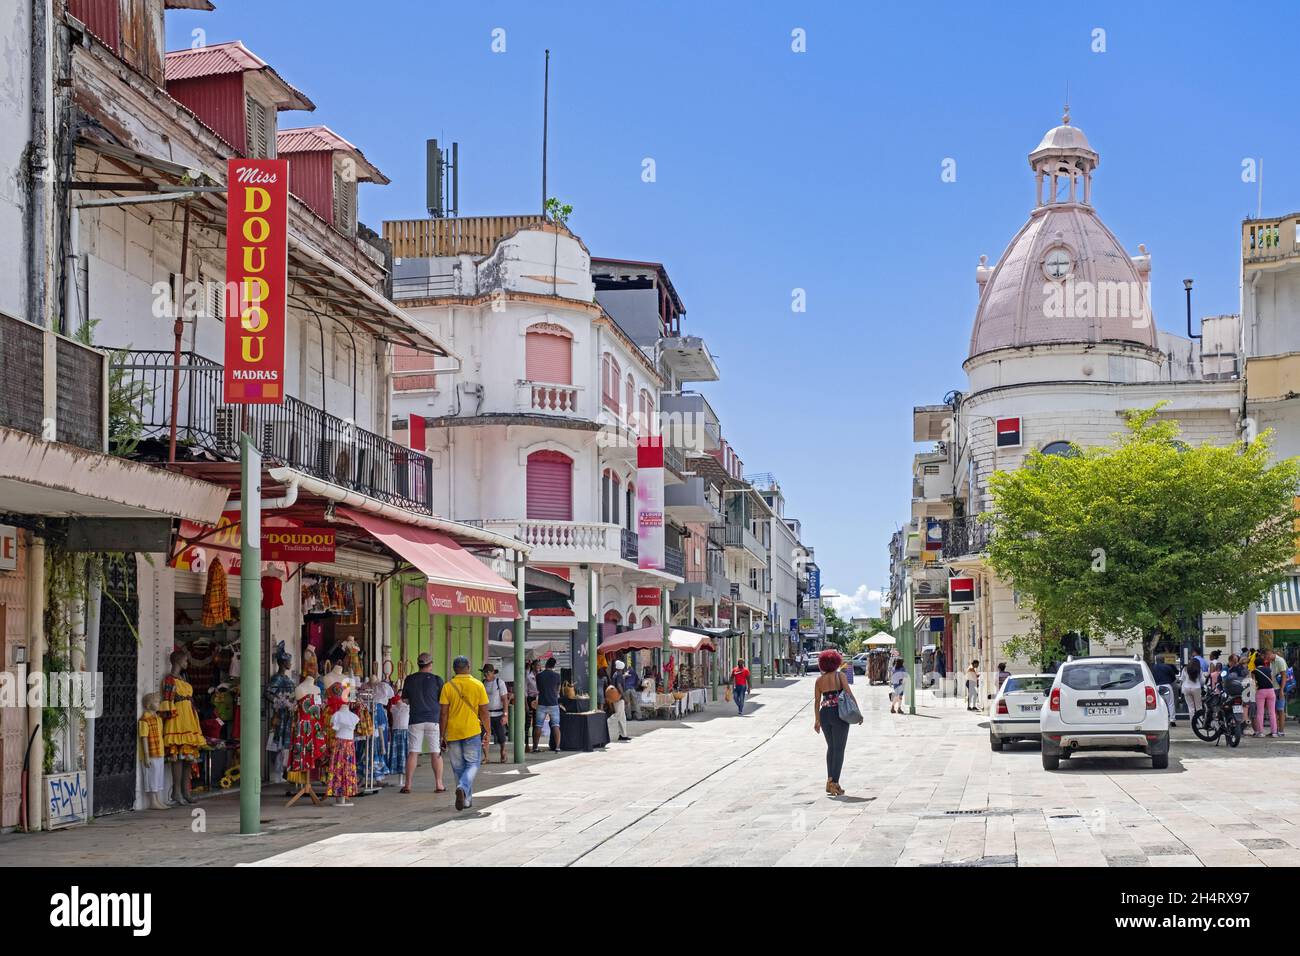 Shops in the old French colonial city centre of Pointe-à-Pitre, Grande-Terre at Guadeloupe, Lesser Antilles in the Caribbean Sea Stock Photo